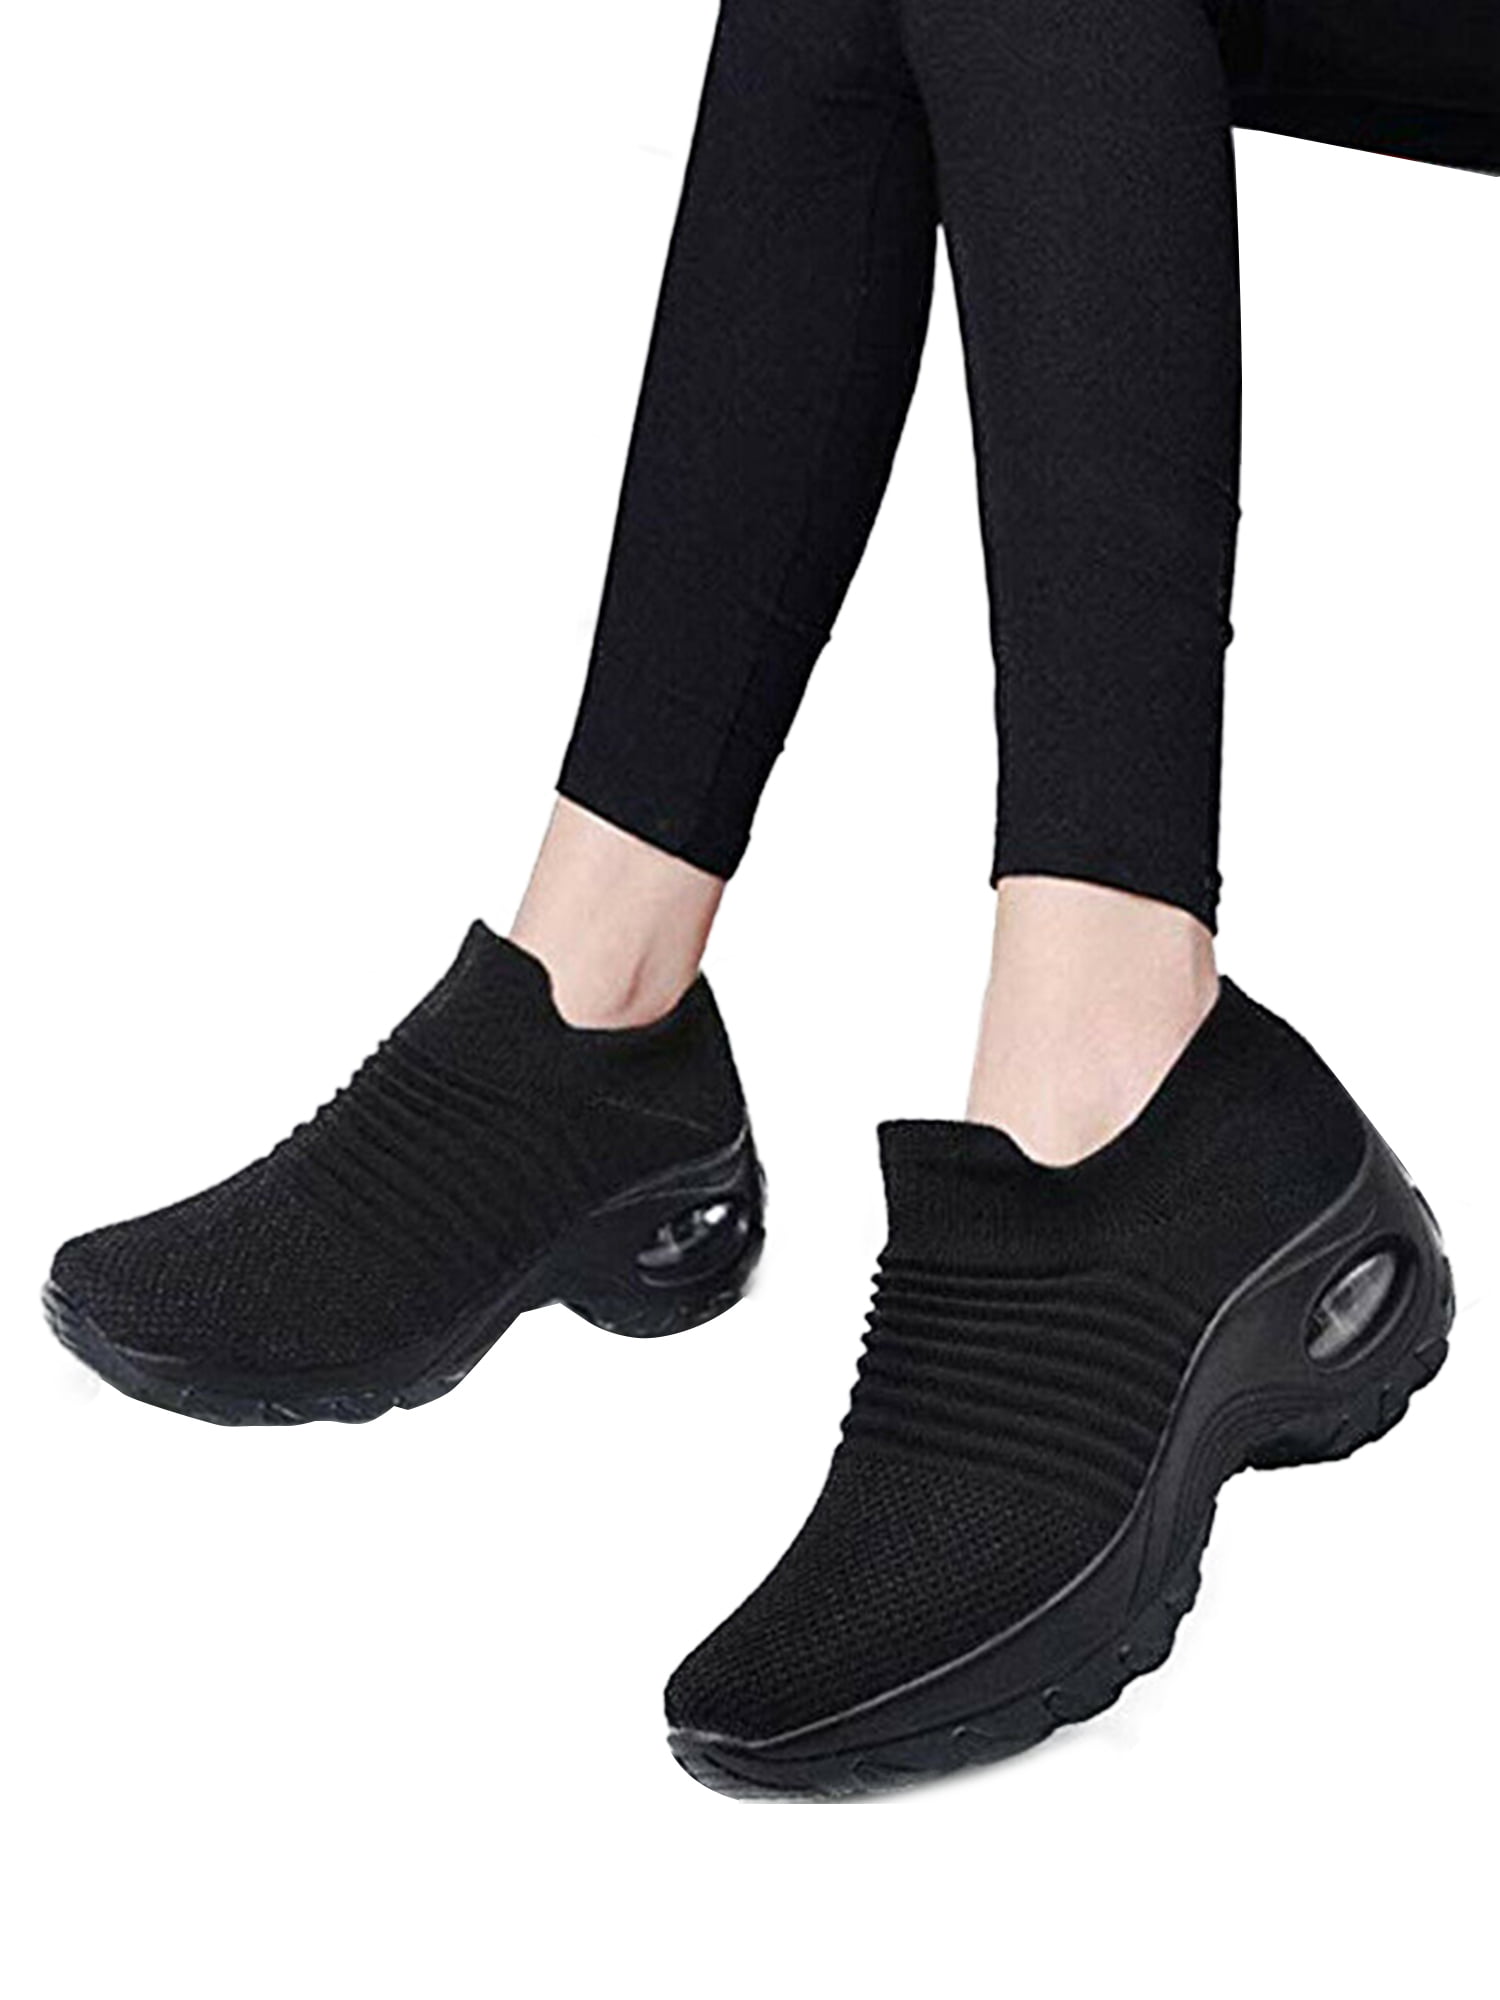 Women's Air Cushion Sport Running Shoes Breathable Mesh Walking Slip-On Sneakers 